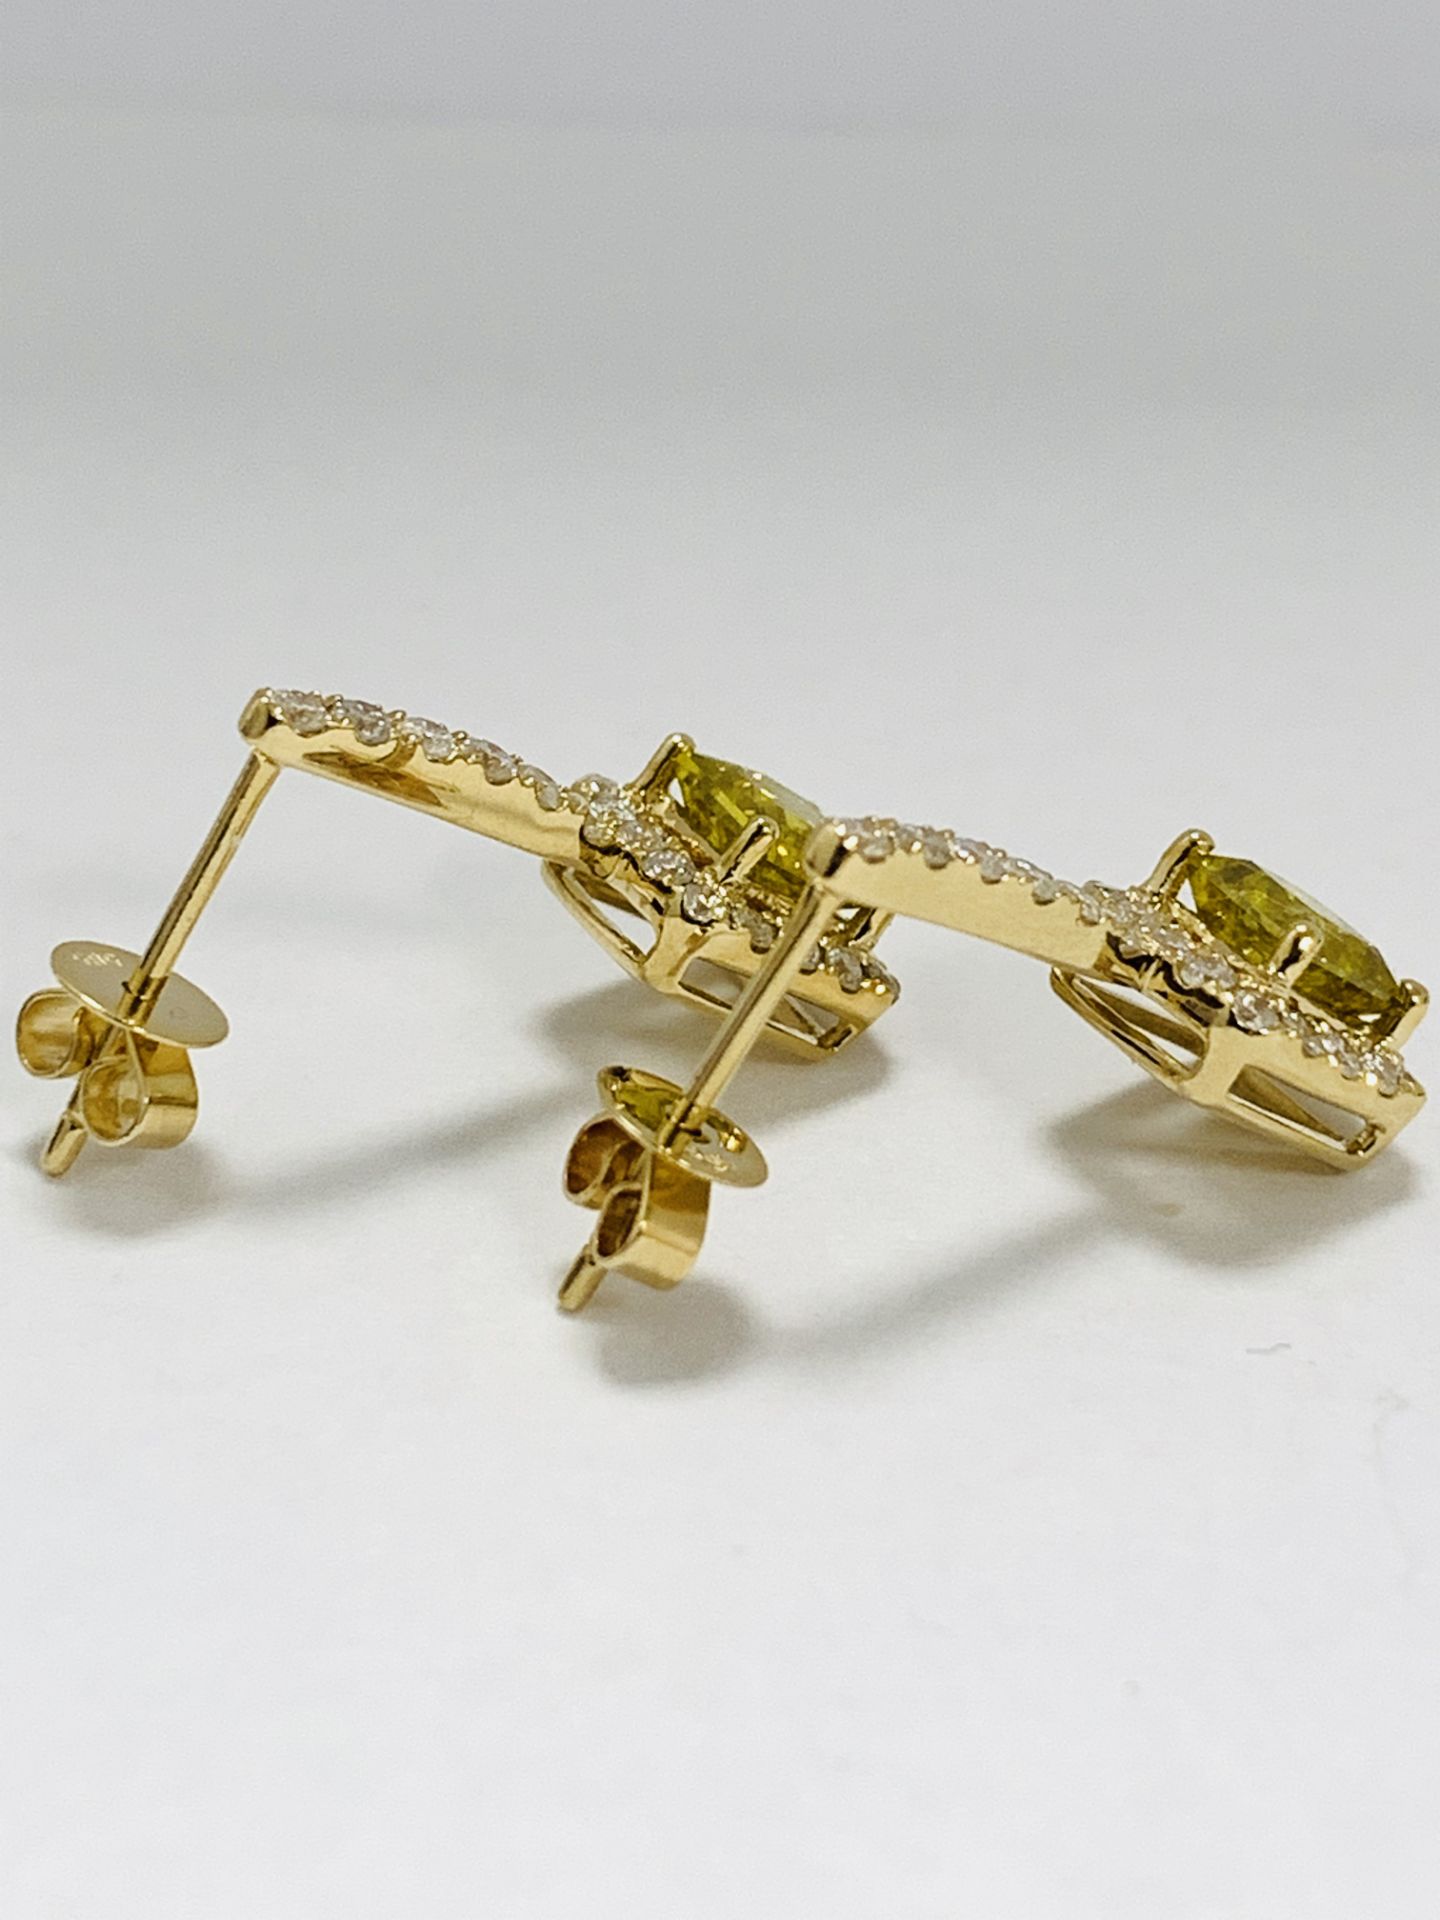 14K Yellow Gold Pair Of Earrings - Image 5 of 9